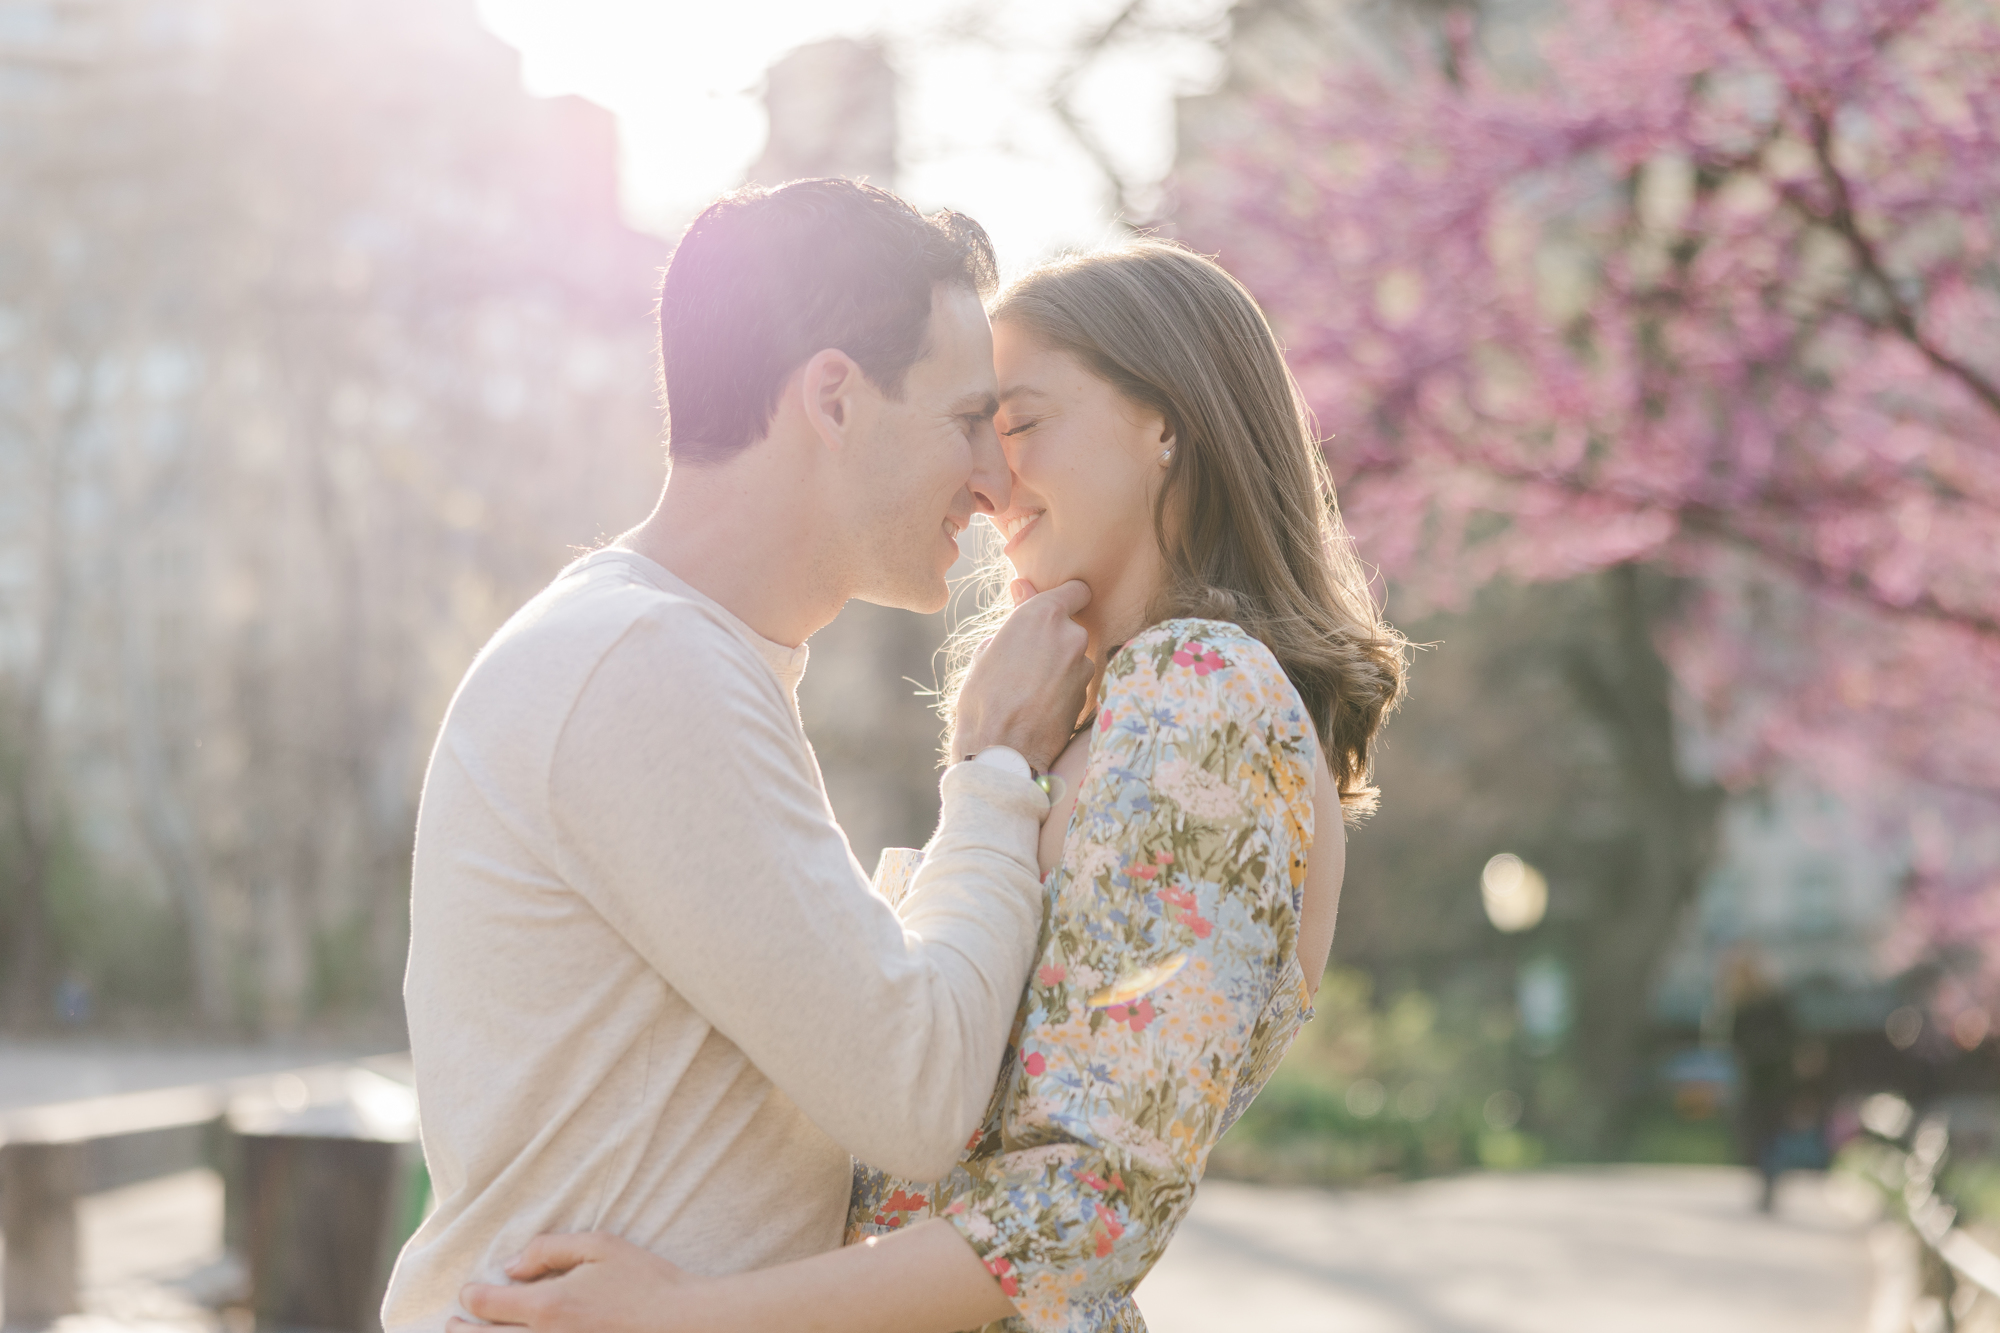 Candid Upper East Side Engagement Photo Shoot